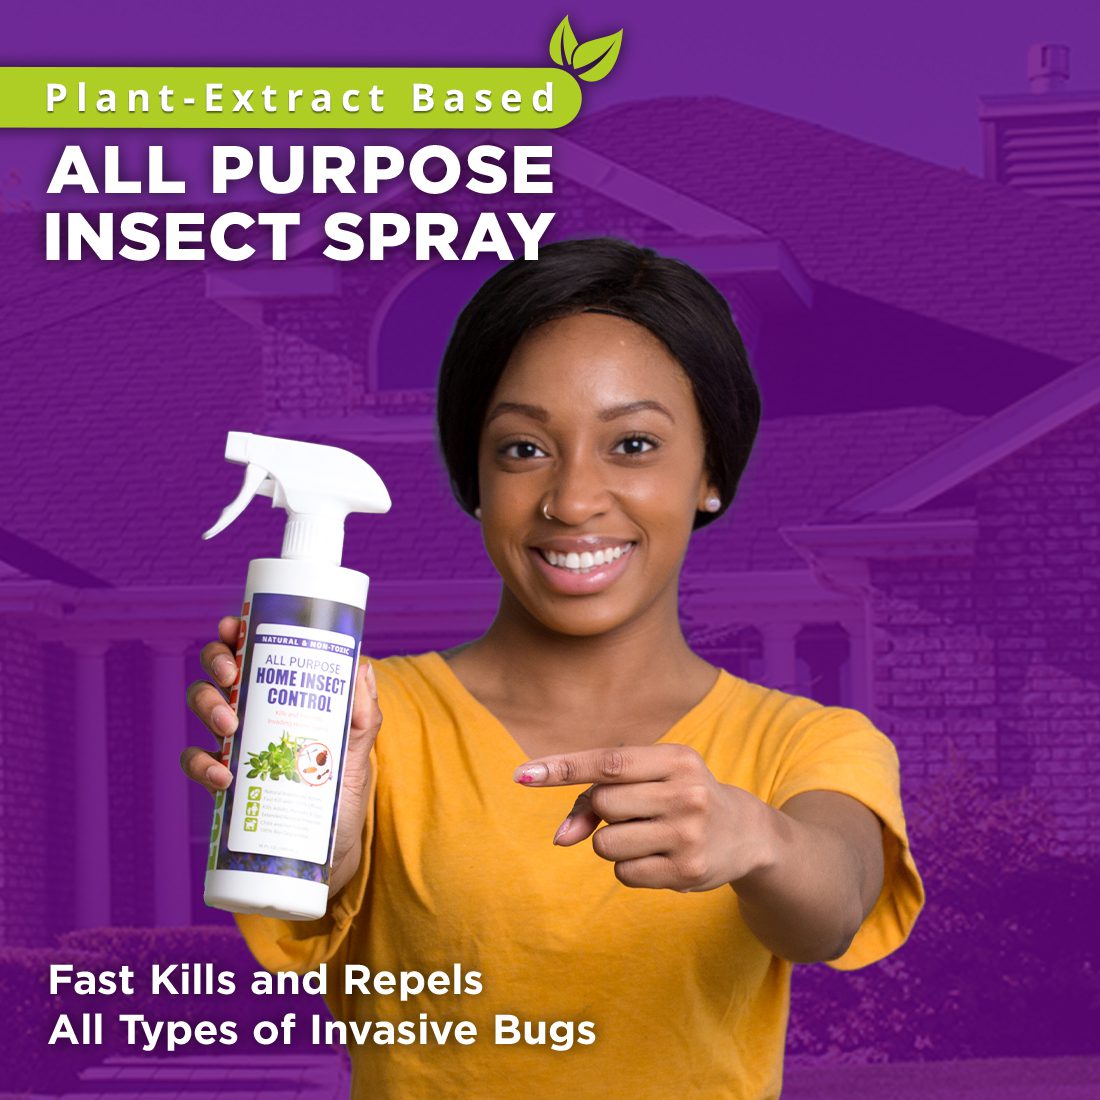 Optimum · Insect spray · With natural active ingredient